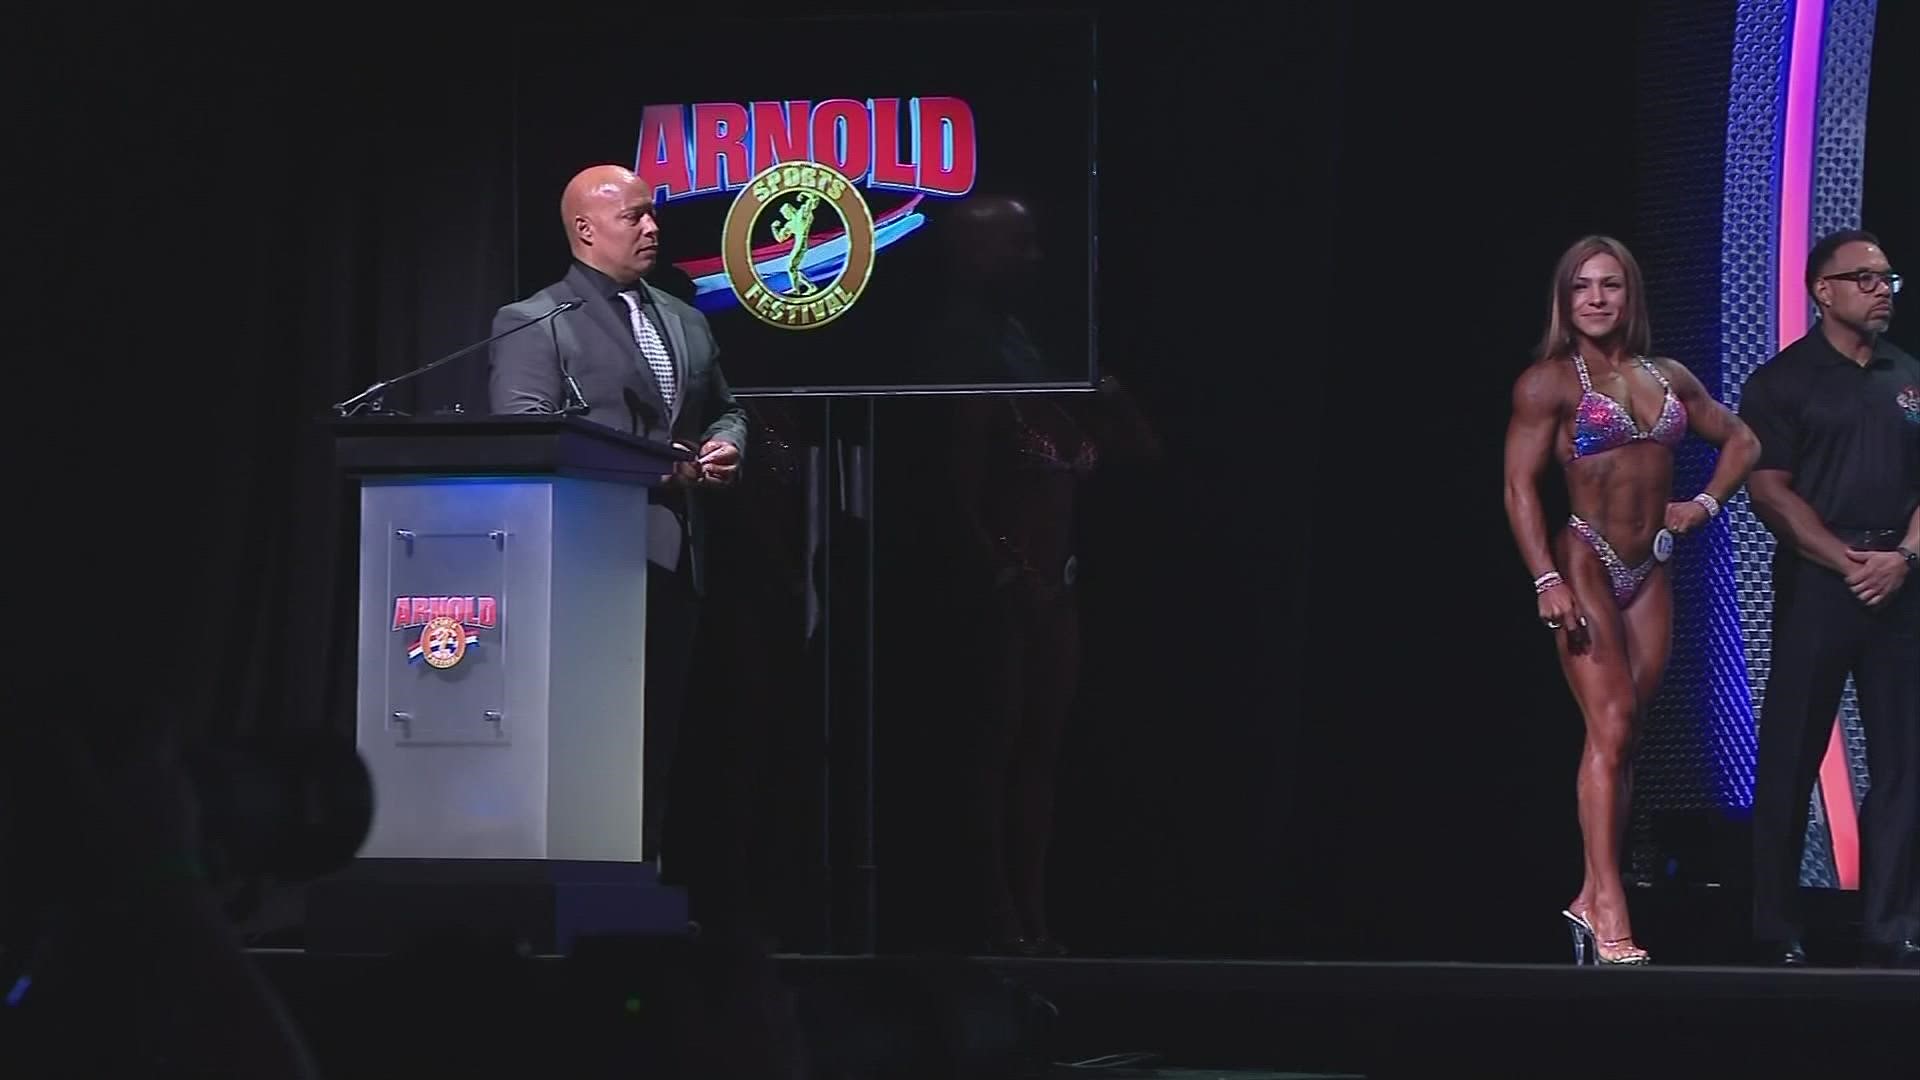 The Arnold Classic returns to Columbus on Saturday for the first time in more than a year.